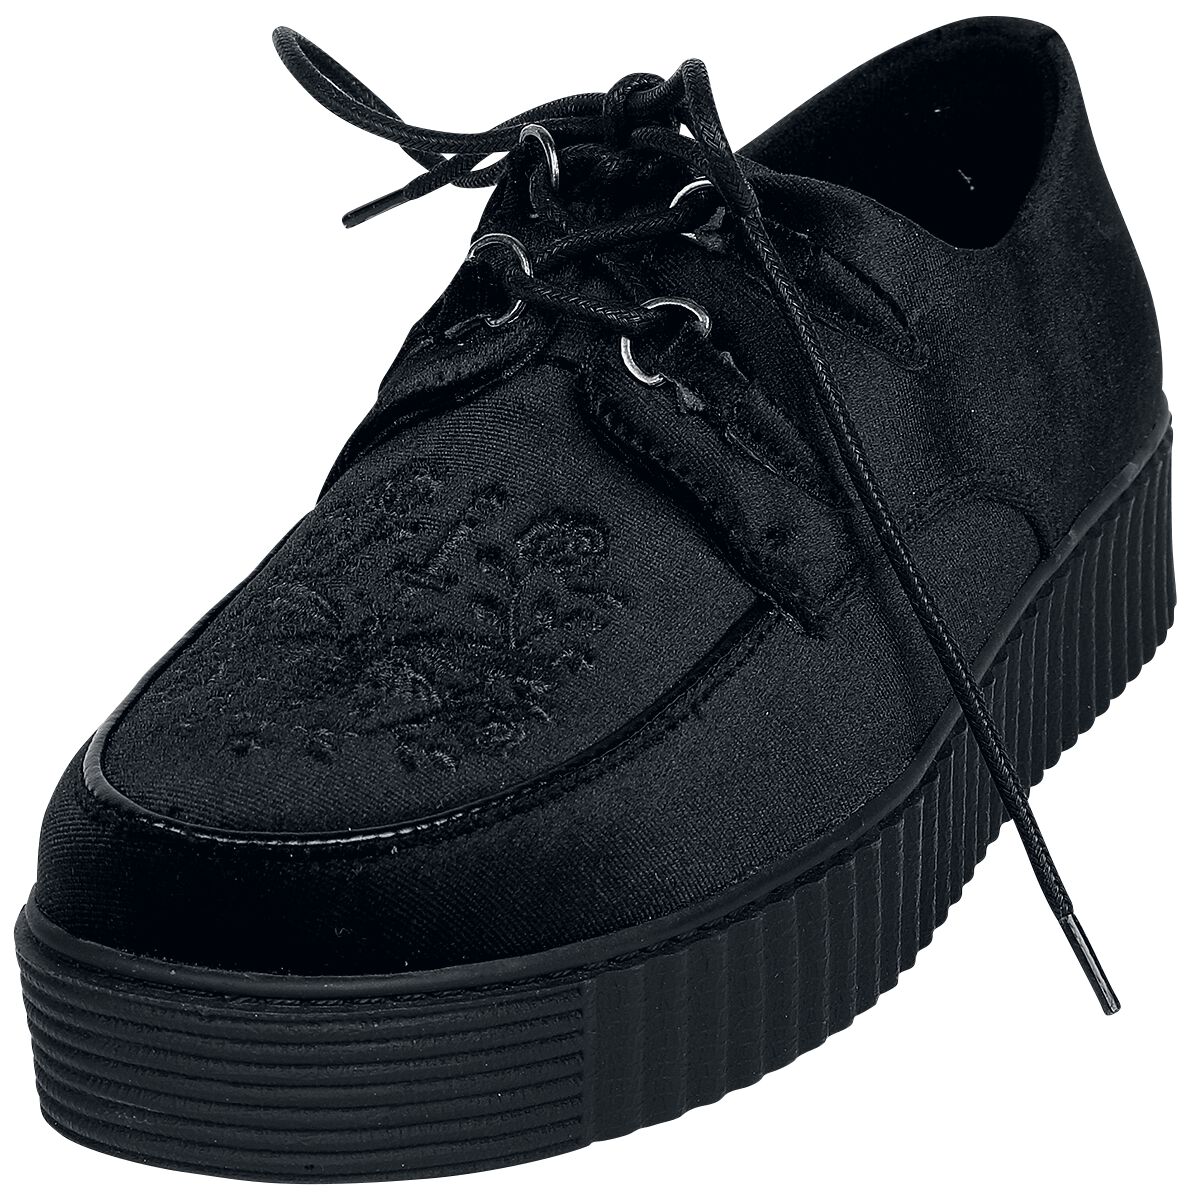 Black Creepers Gothicana by Creepers Large